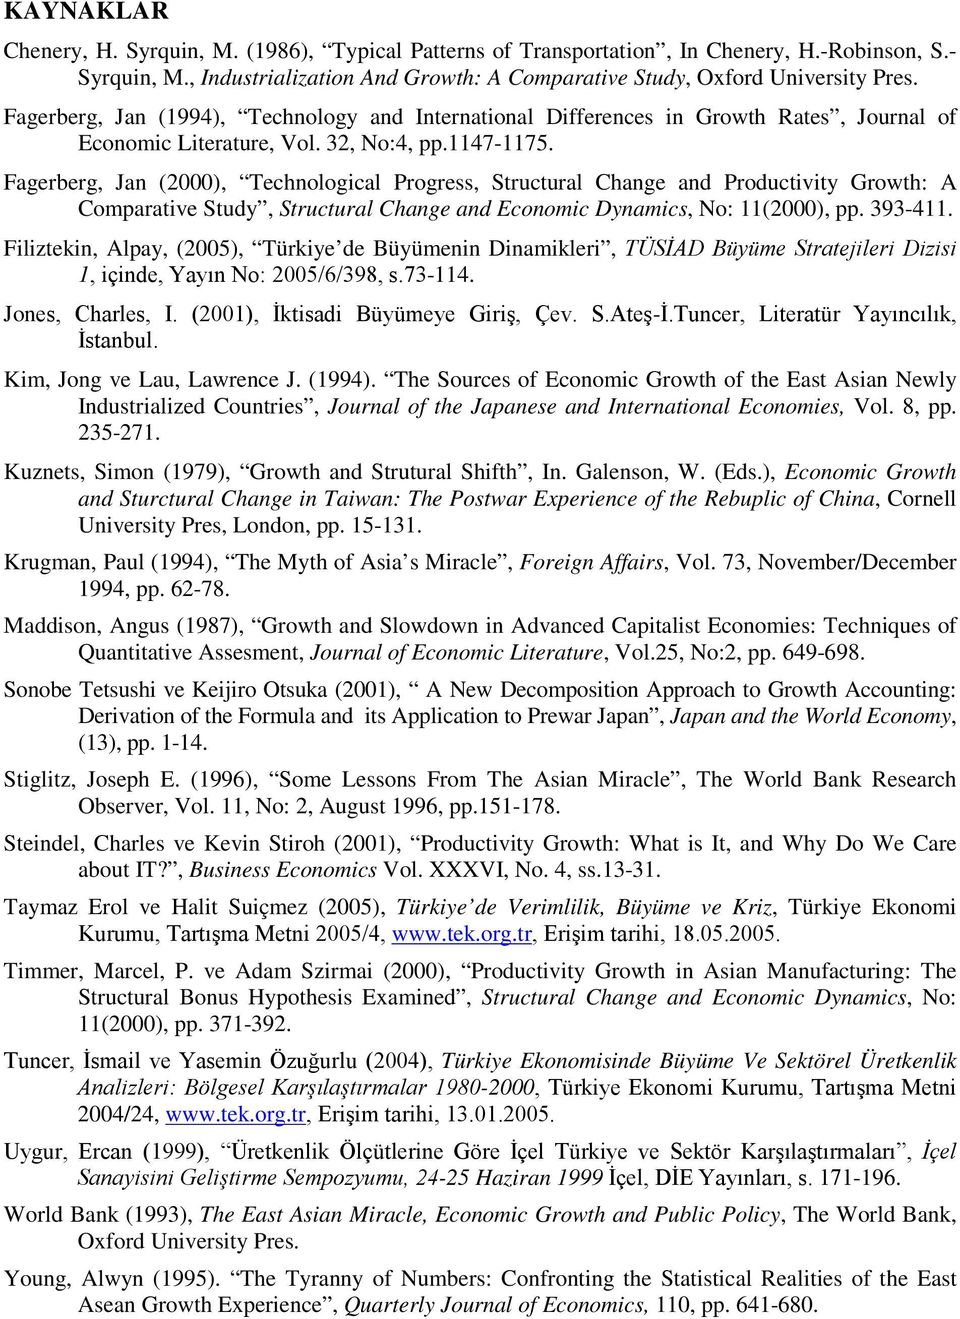 Fagerberg, Ja (2000), Techologcal Progress, Srucural Chage ad Producvy Growh: A Comparave Sudy, Srucural Chage ad Ecoomc Dyamcs, No: (2000), pp. 393-4.